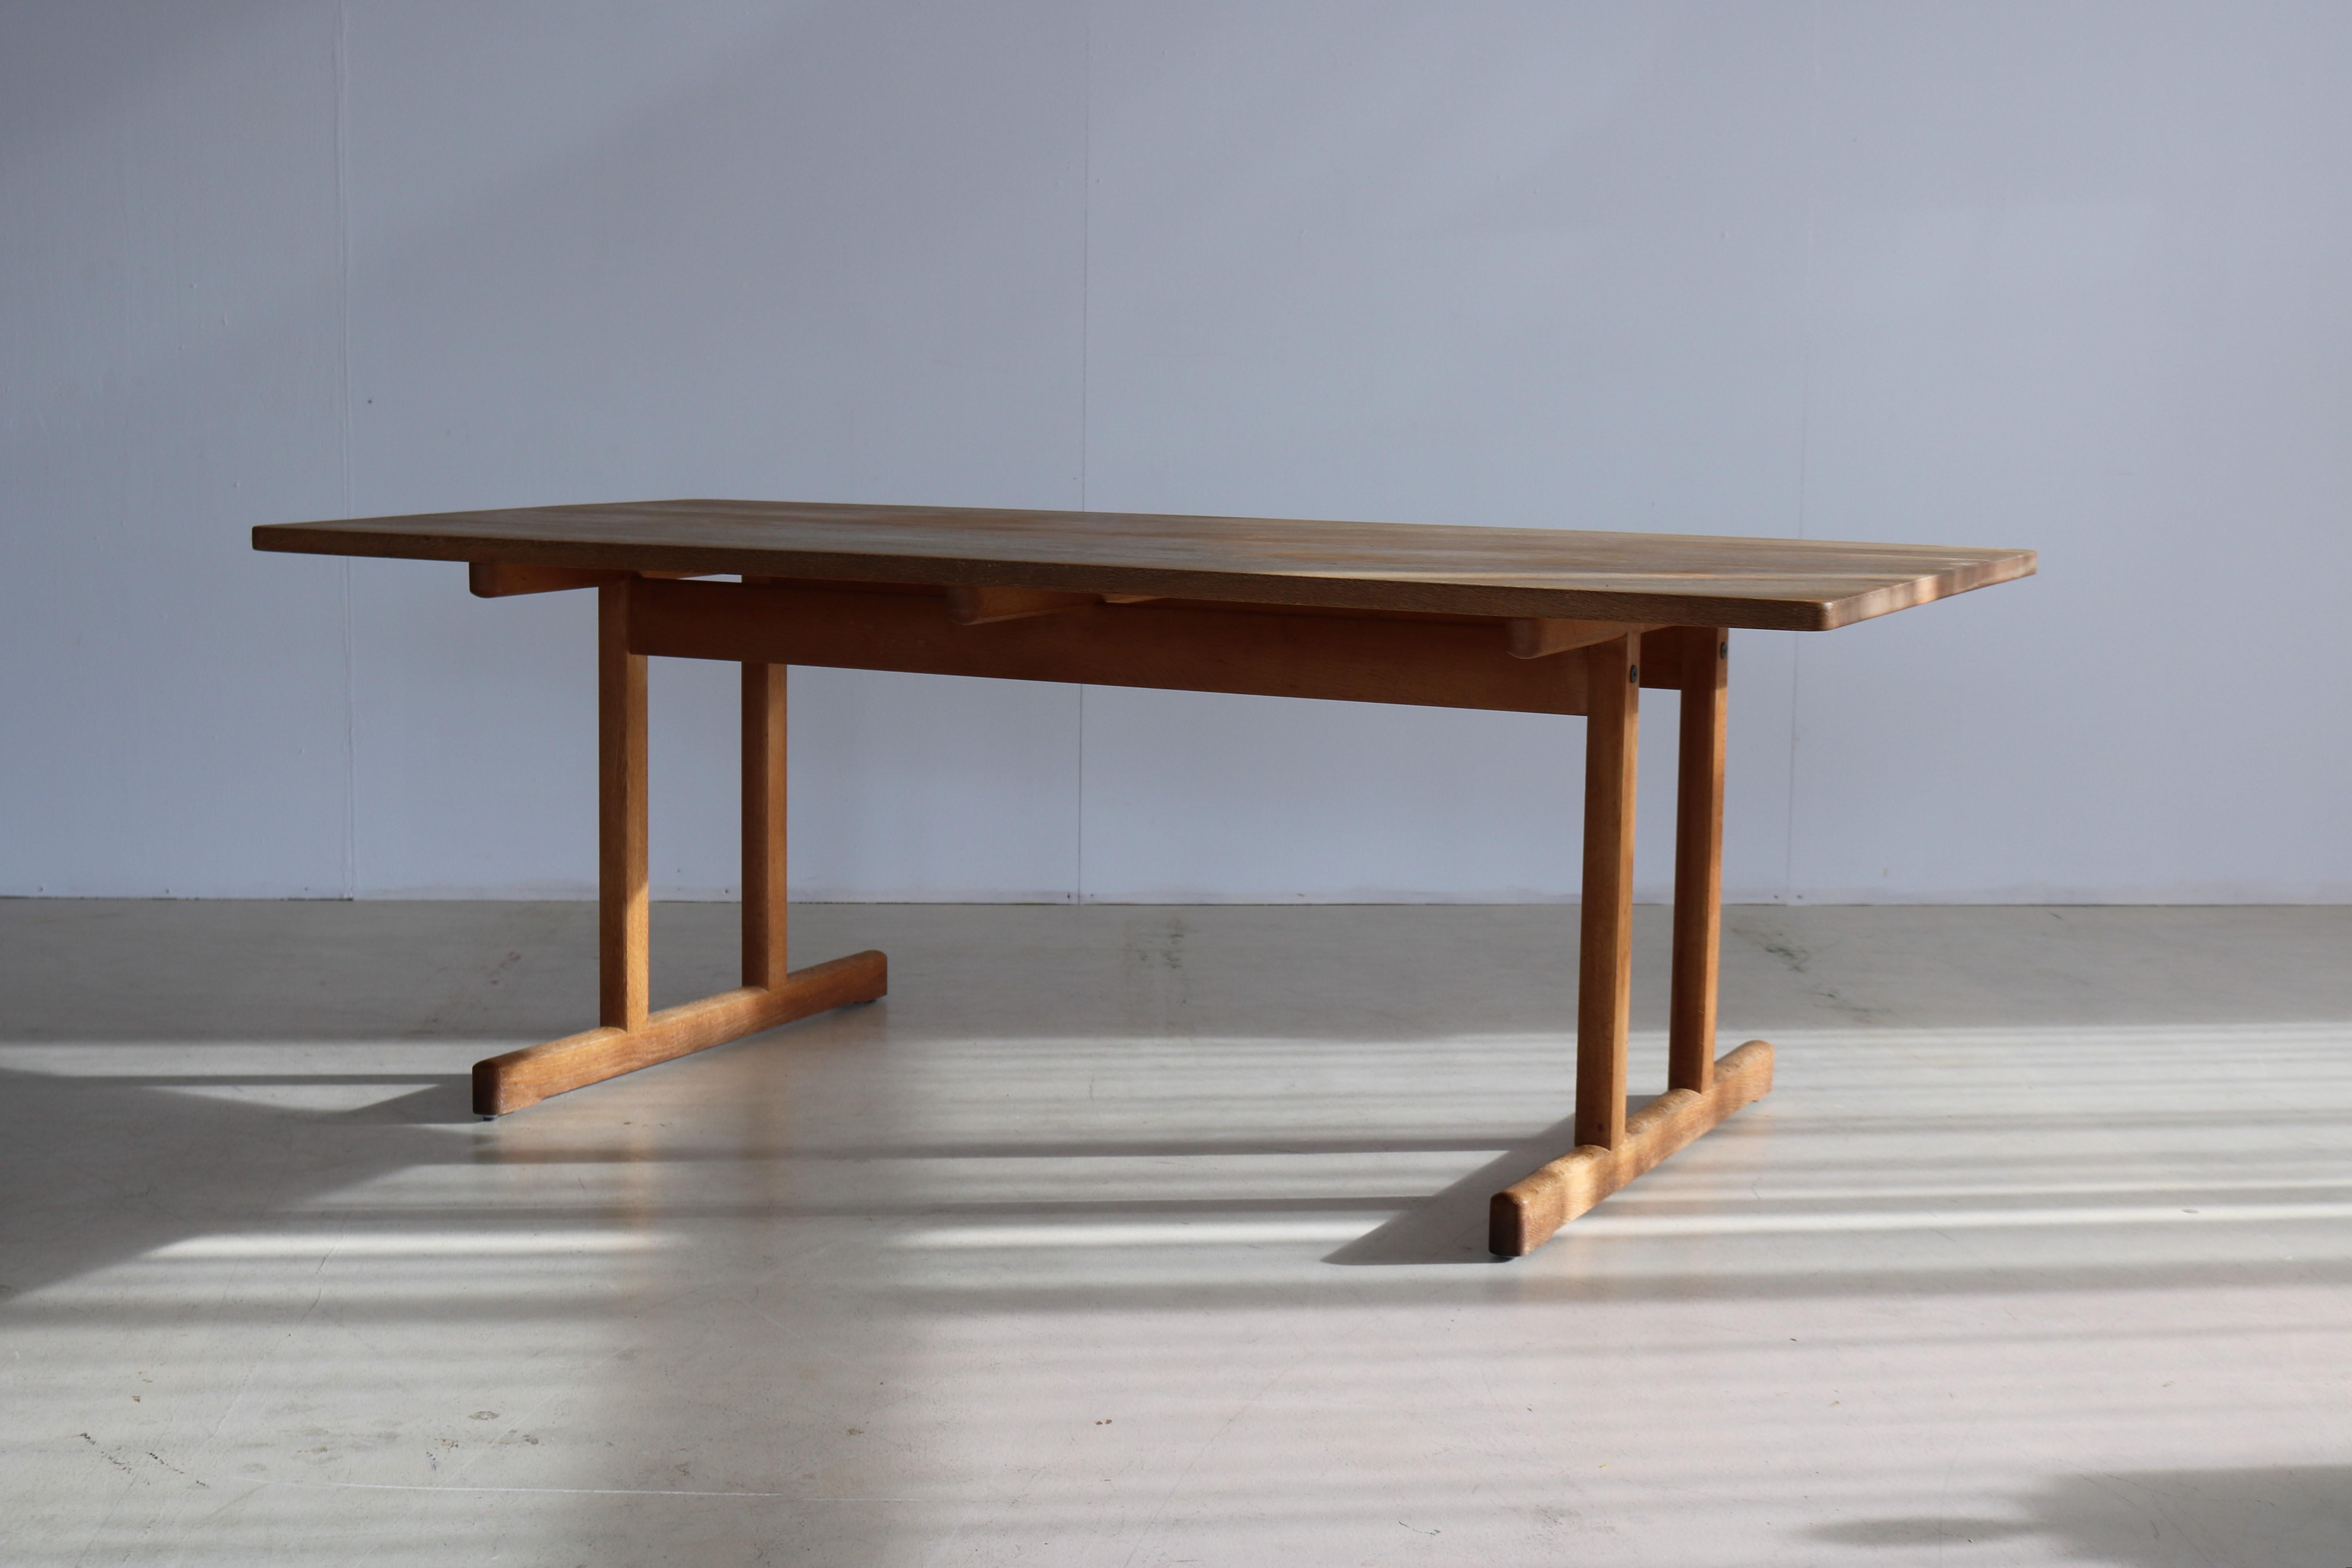 Vintage dining table table Borge Mogensen model 6286 Danish

Period 60's
Designs Borge Mogensen Fredericia Denmark
Conditions excellent light signs of use
Size 72 x 195 x 97.5 (HxWxD)

Details Oak; model 6286

Article number 1733.
   